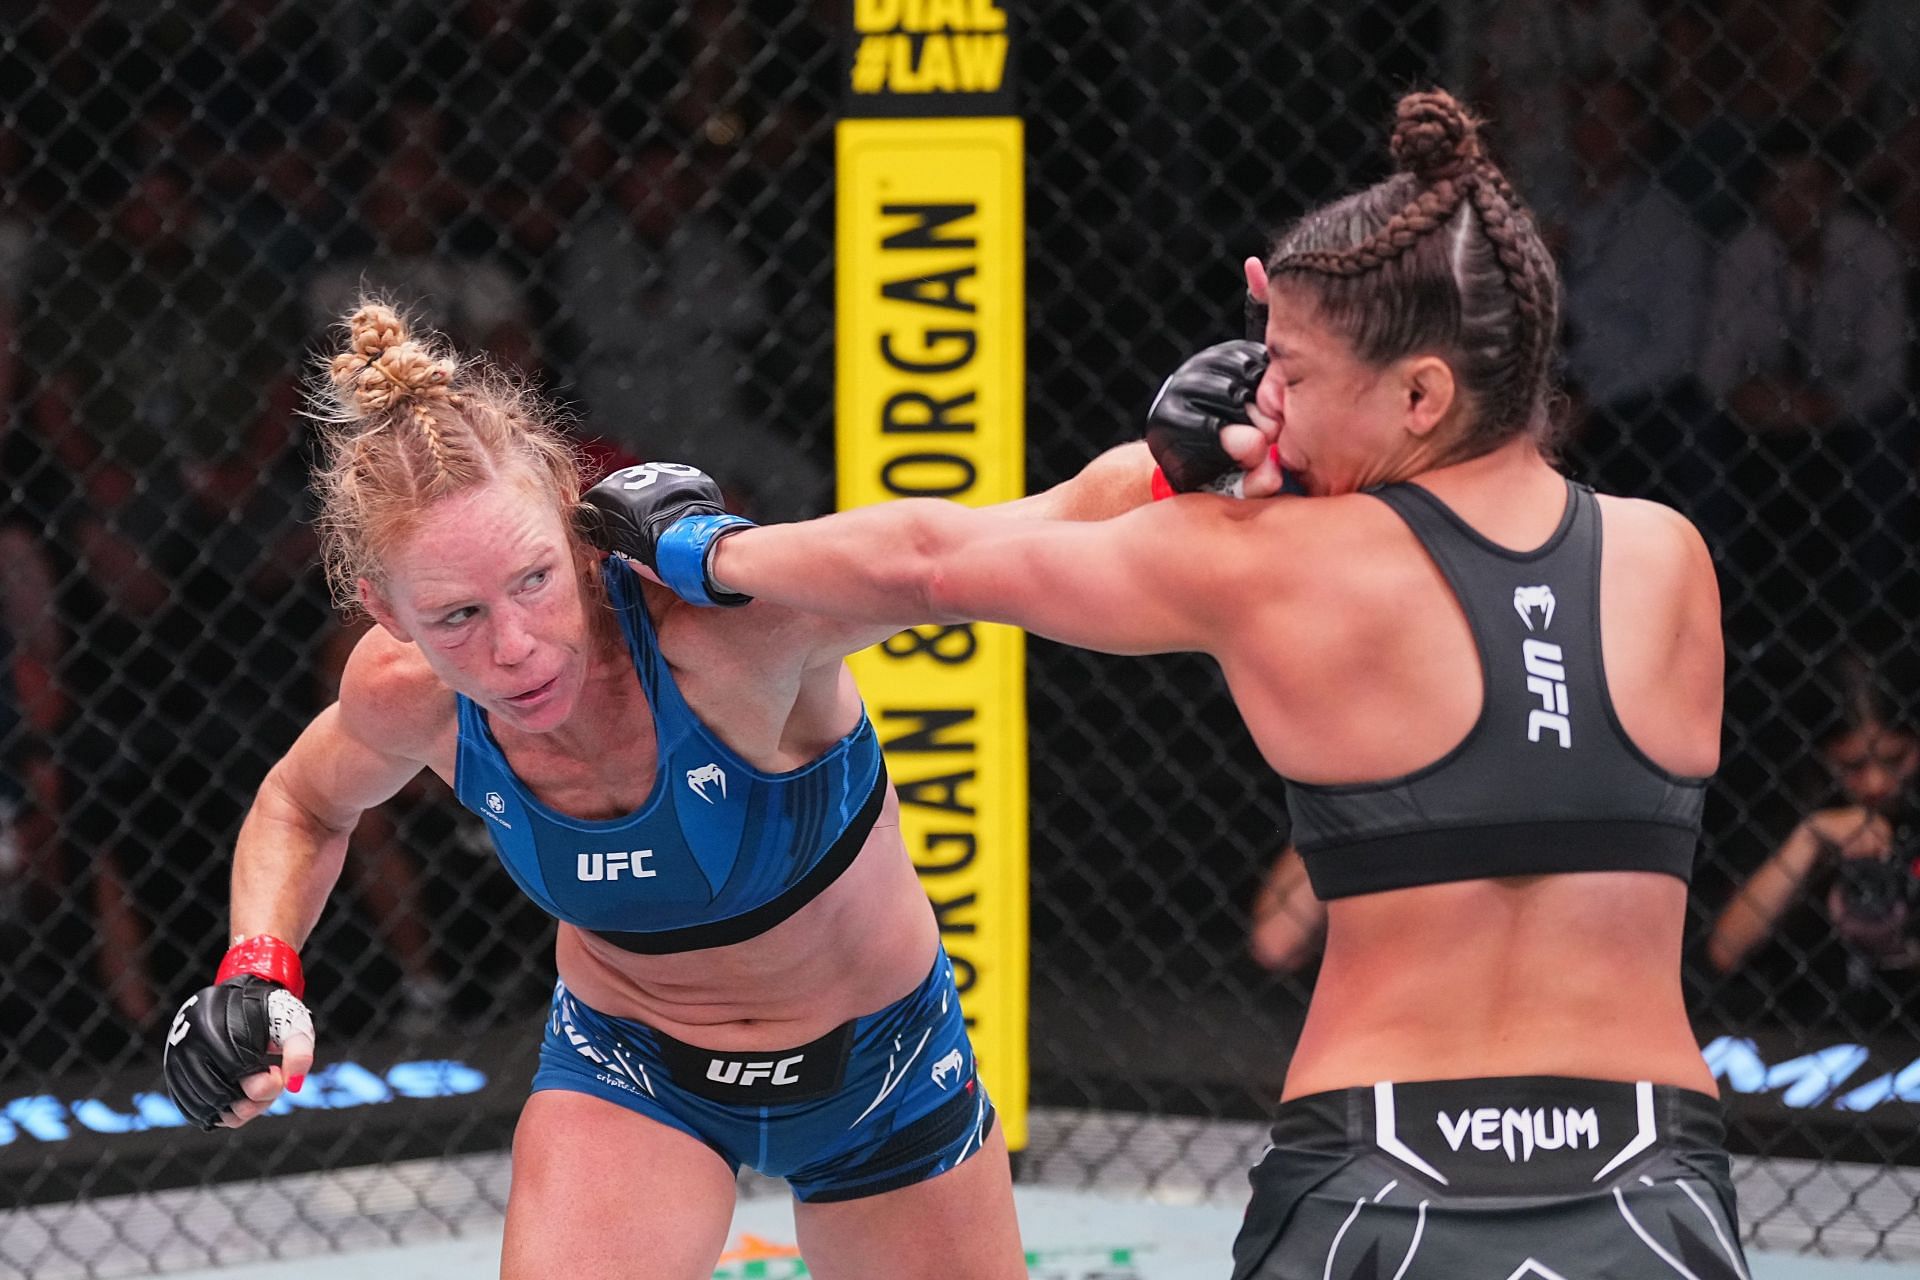 After her loss last night, Holly Holm could settle into a role as a gatekeeper